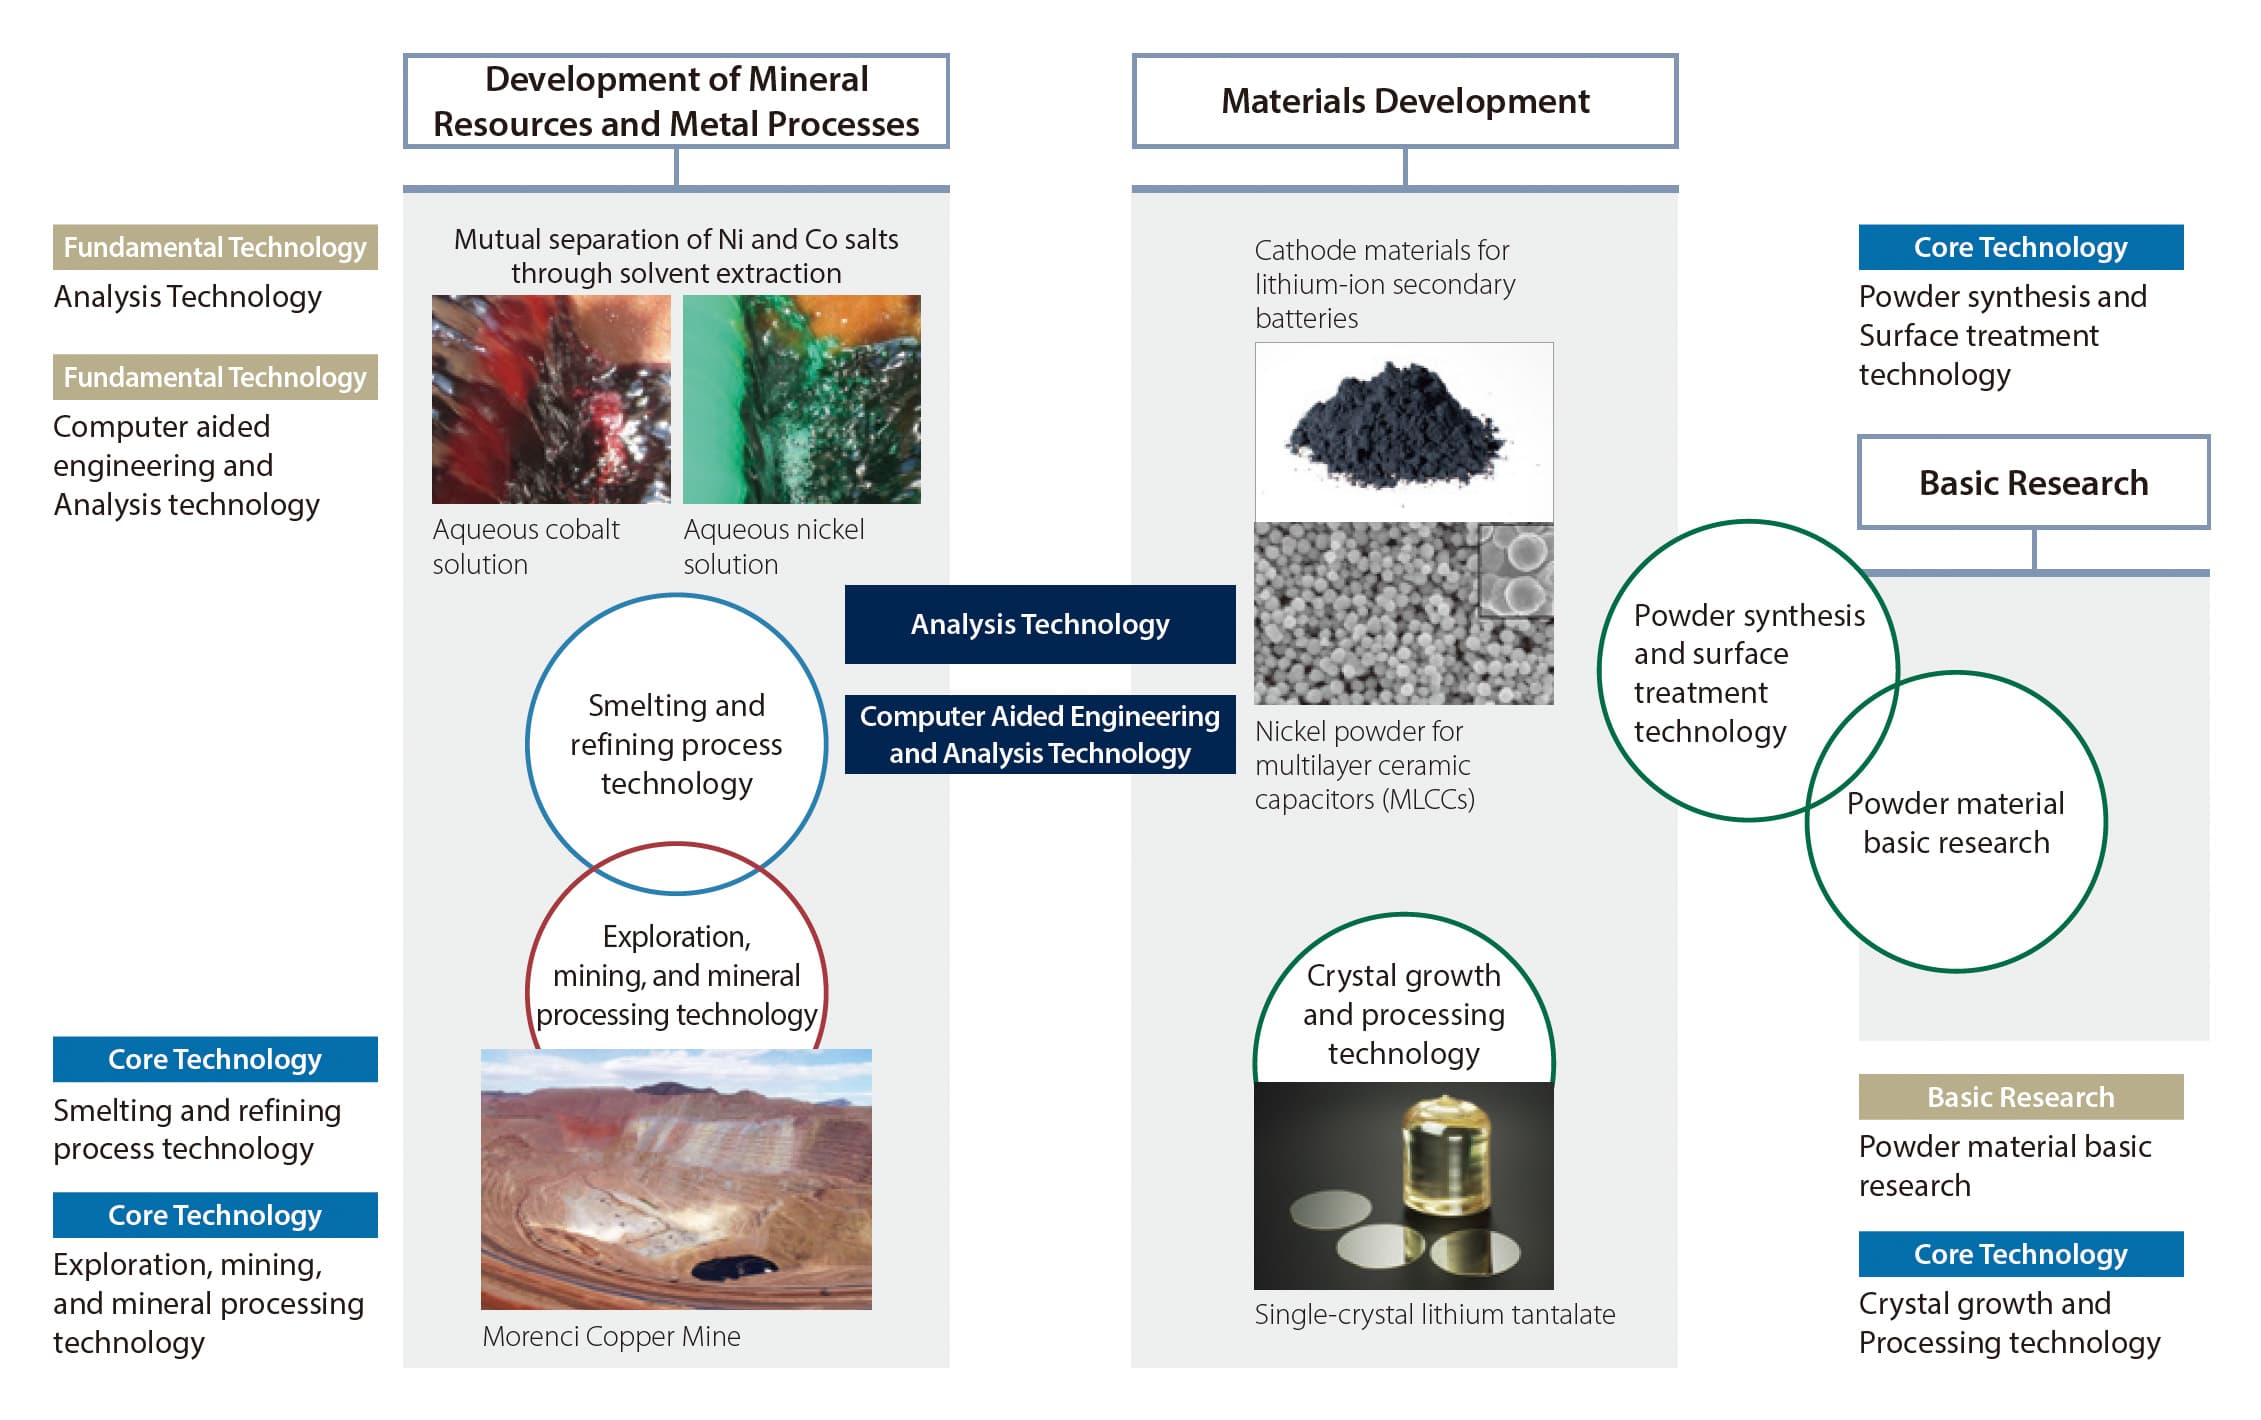 The development of mineral resources and metal processes has interrelated technologies in the form of smelting and refining process technology and exploration, mining, and mineral processing technology, while material development has powder synthesis and surface treatment technology and crystal growth and processing technology. Technologies that apply to both the development of mineral resources and metal processes and materials development are analysis technology, computer aided engineering and analysis technology, and information and communication technology (ICT). Basic research includes powder material basic research, and this is linked to powder synthesis and surface treatment technology in material development.